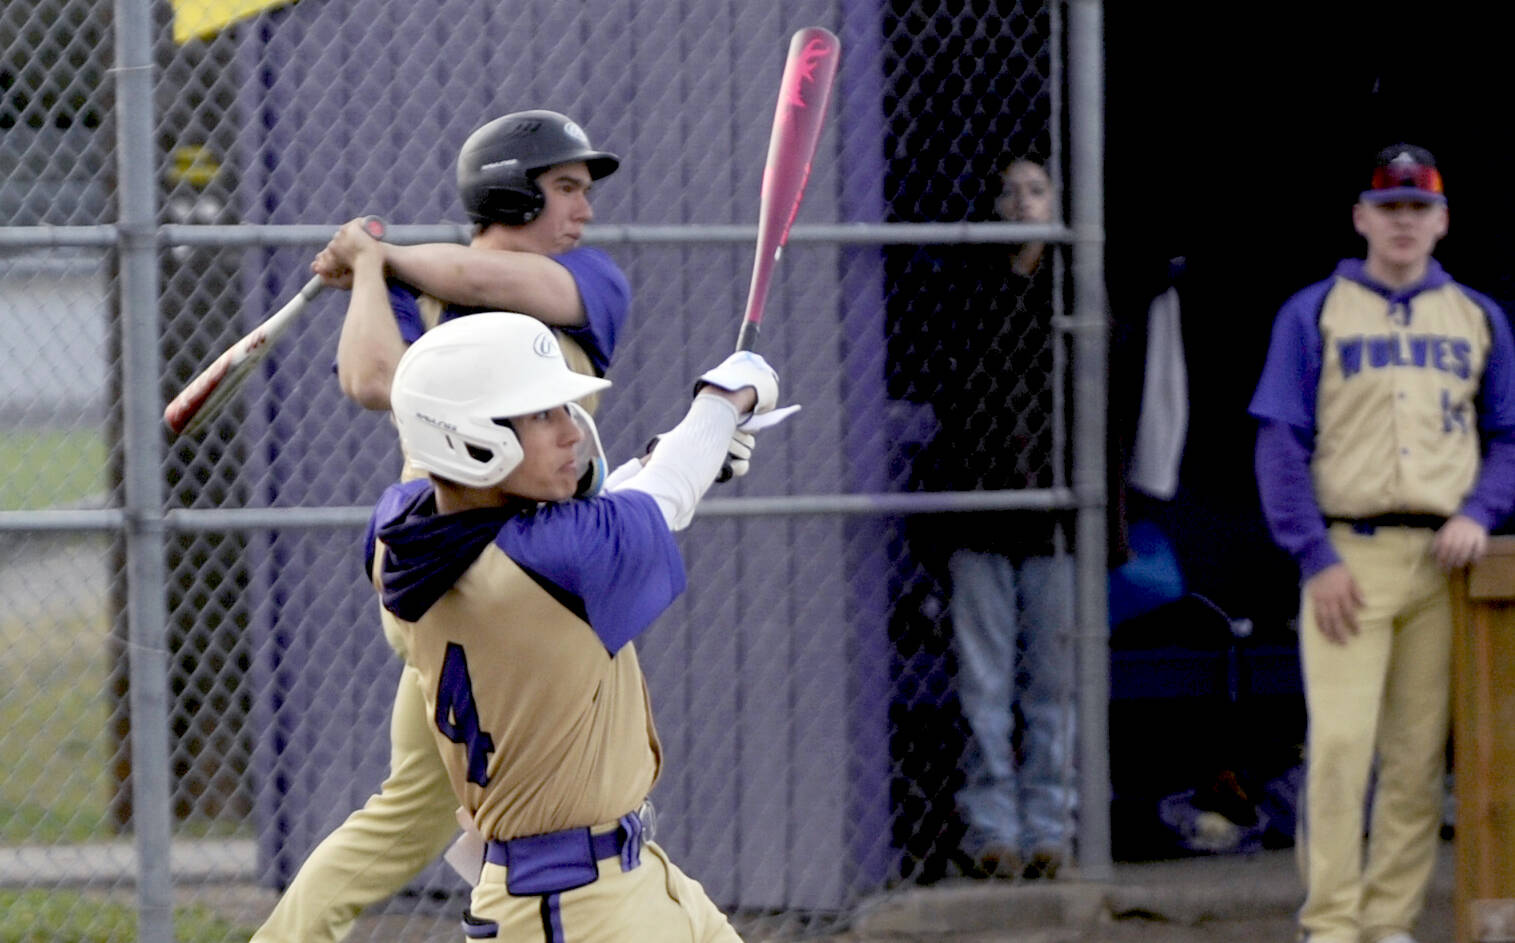 North Kitsap Overpowers Sequim 11-1 in Baseball Event